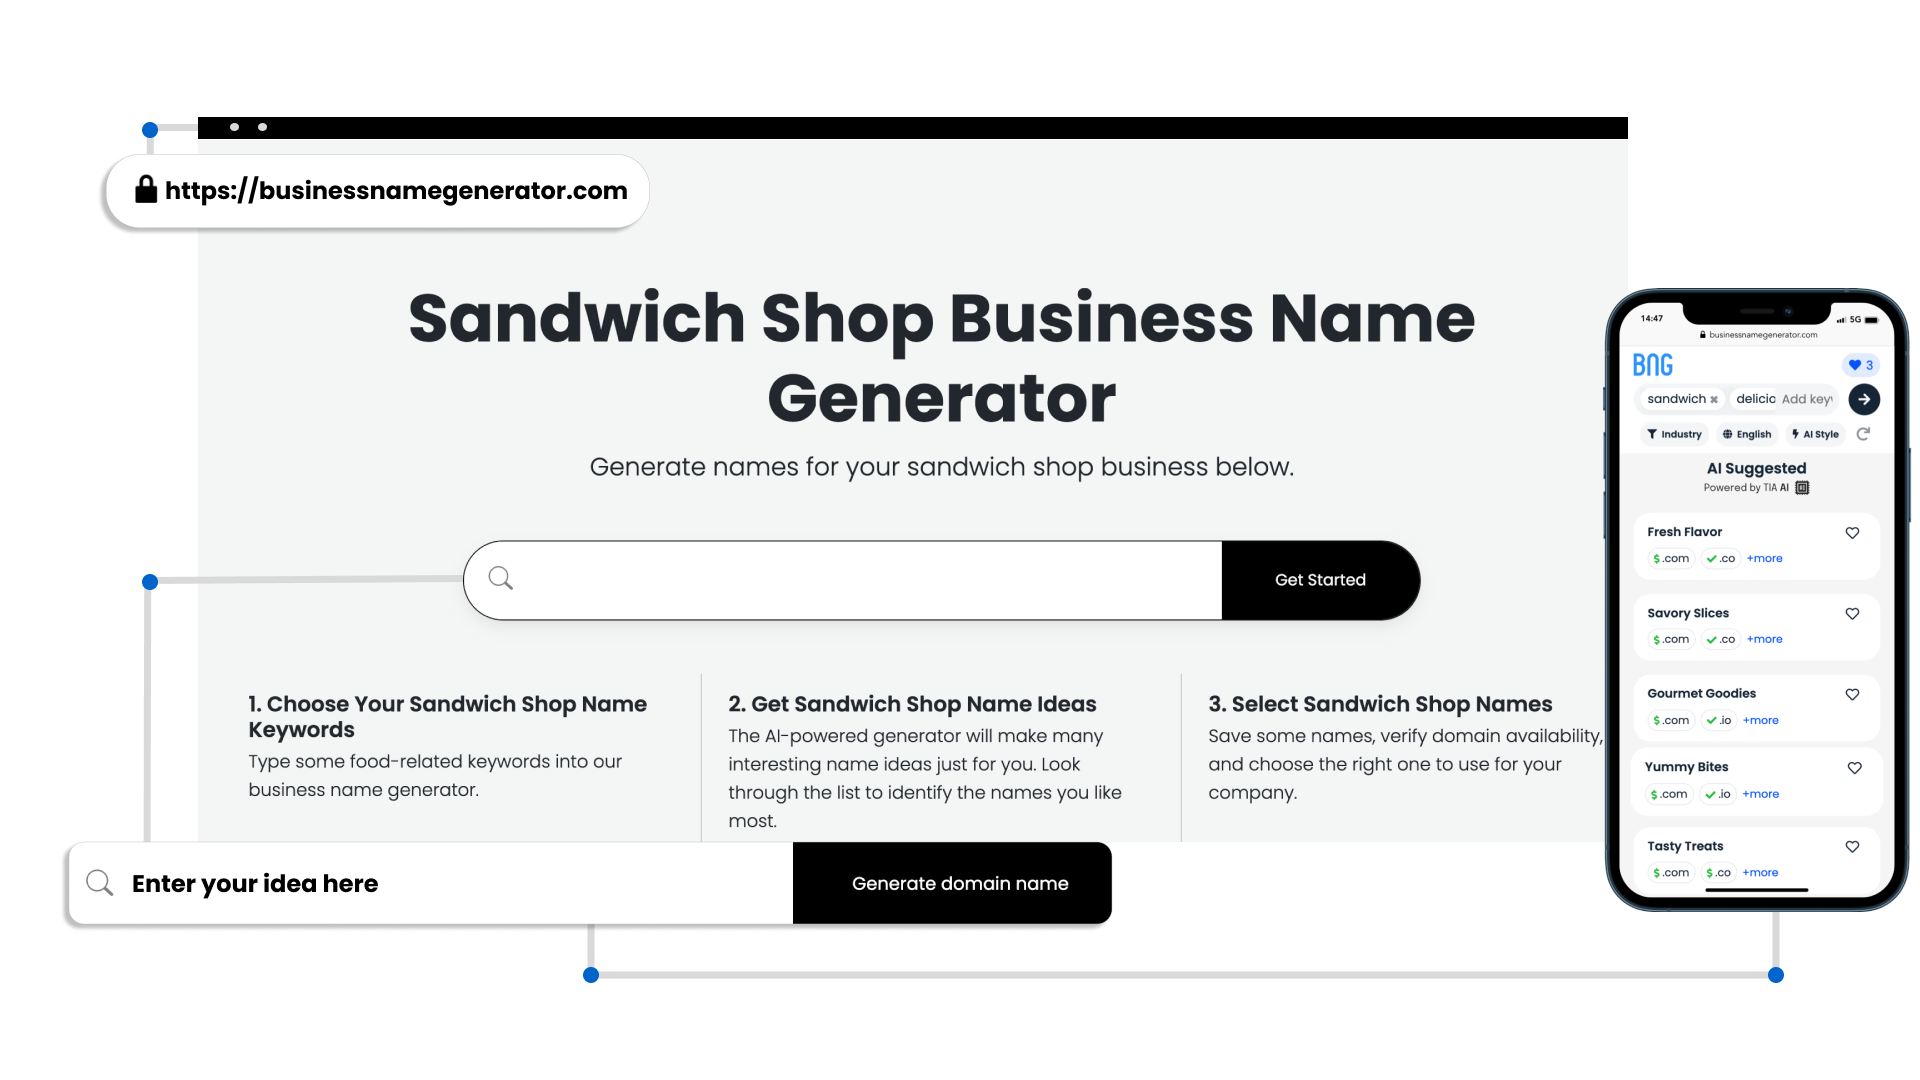 Key Benefits of Our Sandwich Shop Business Name Generator